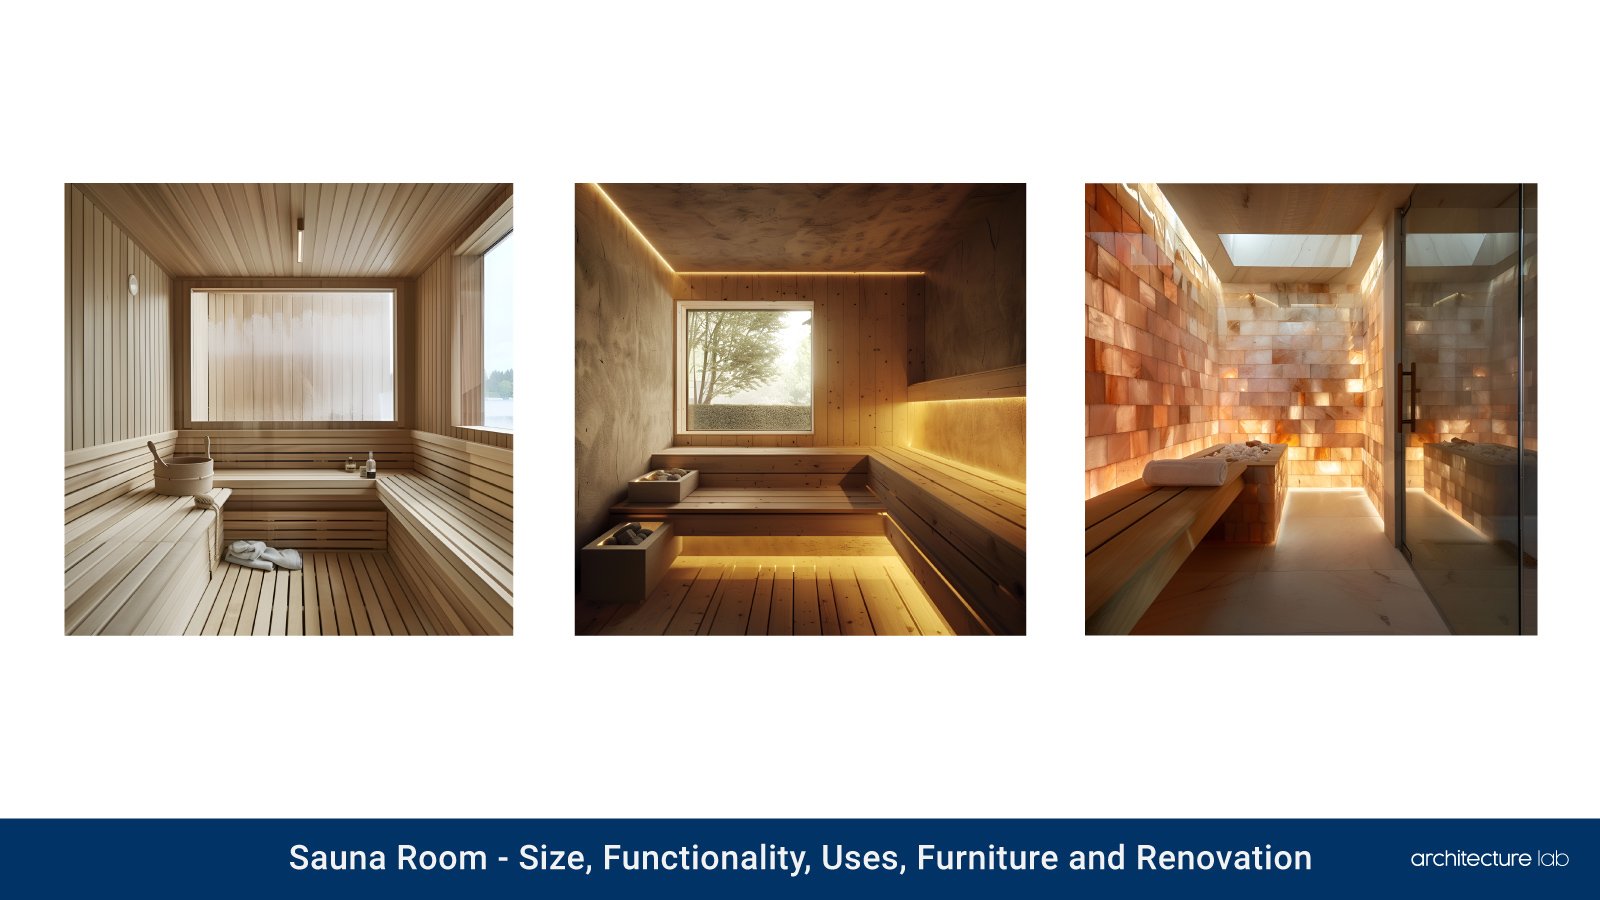 Sauna room: size, functionality, uses, furniture and renovation